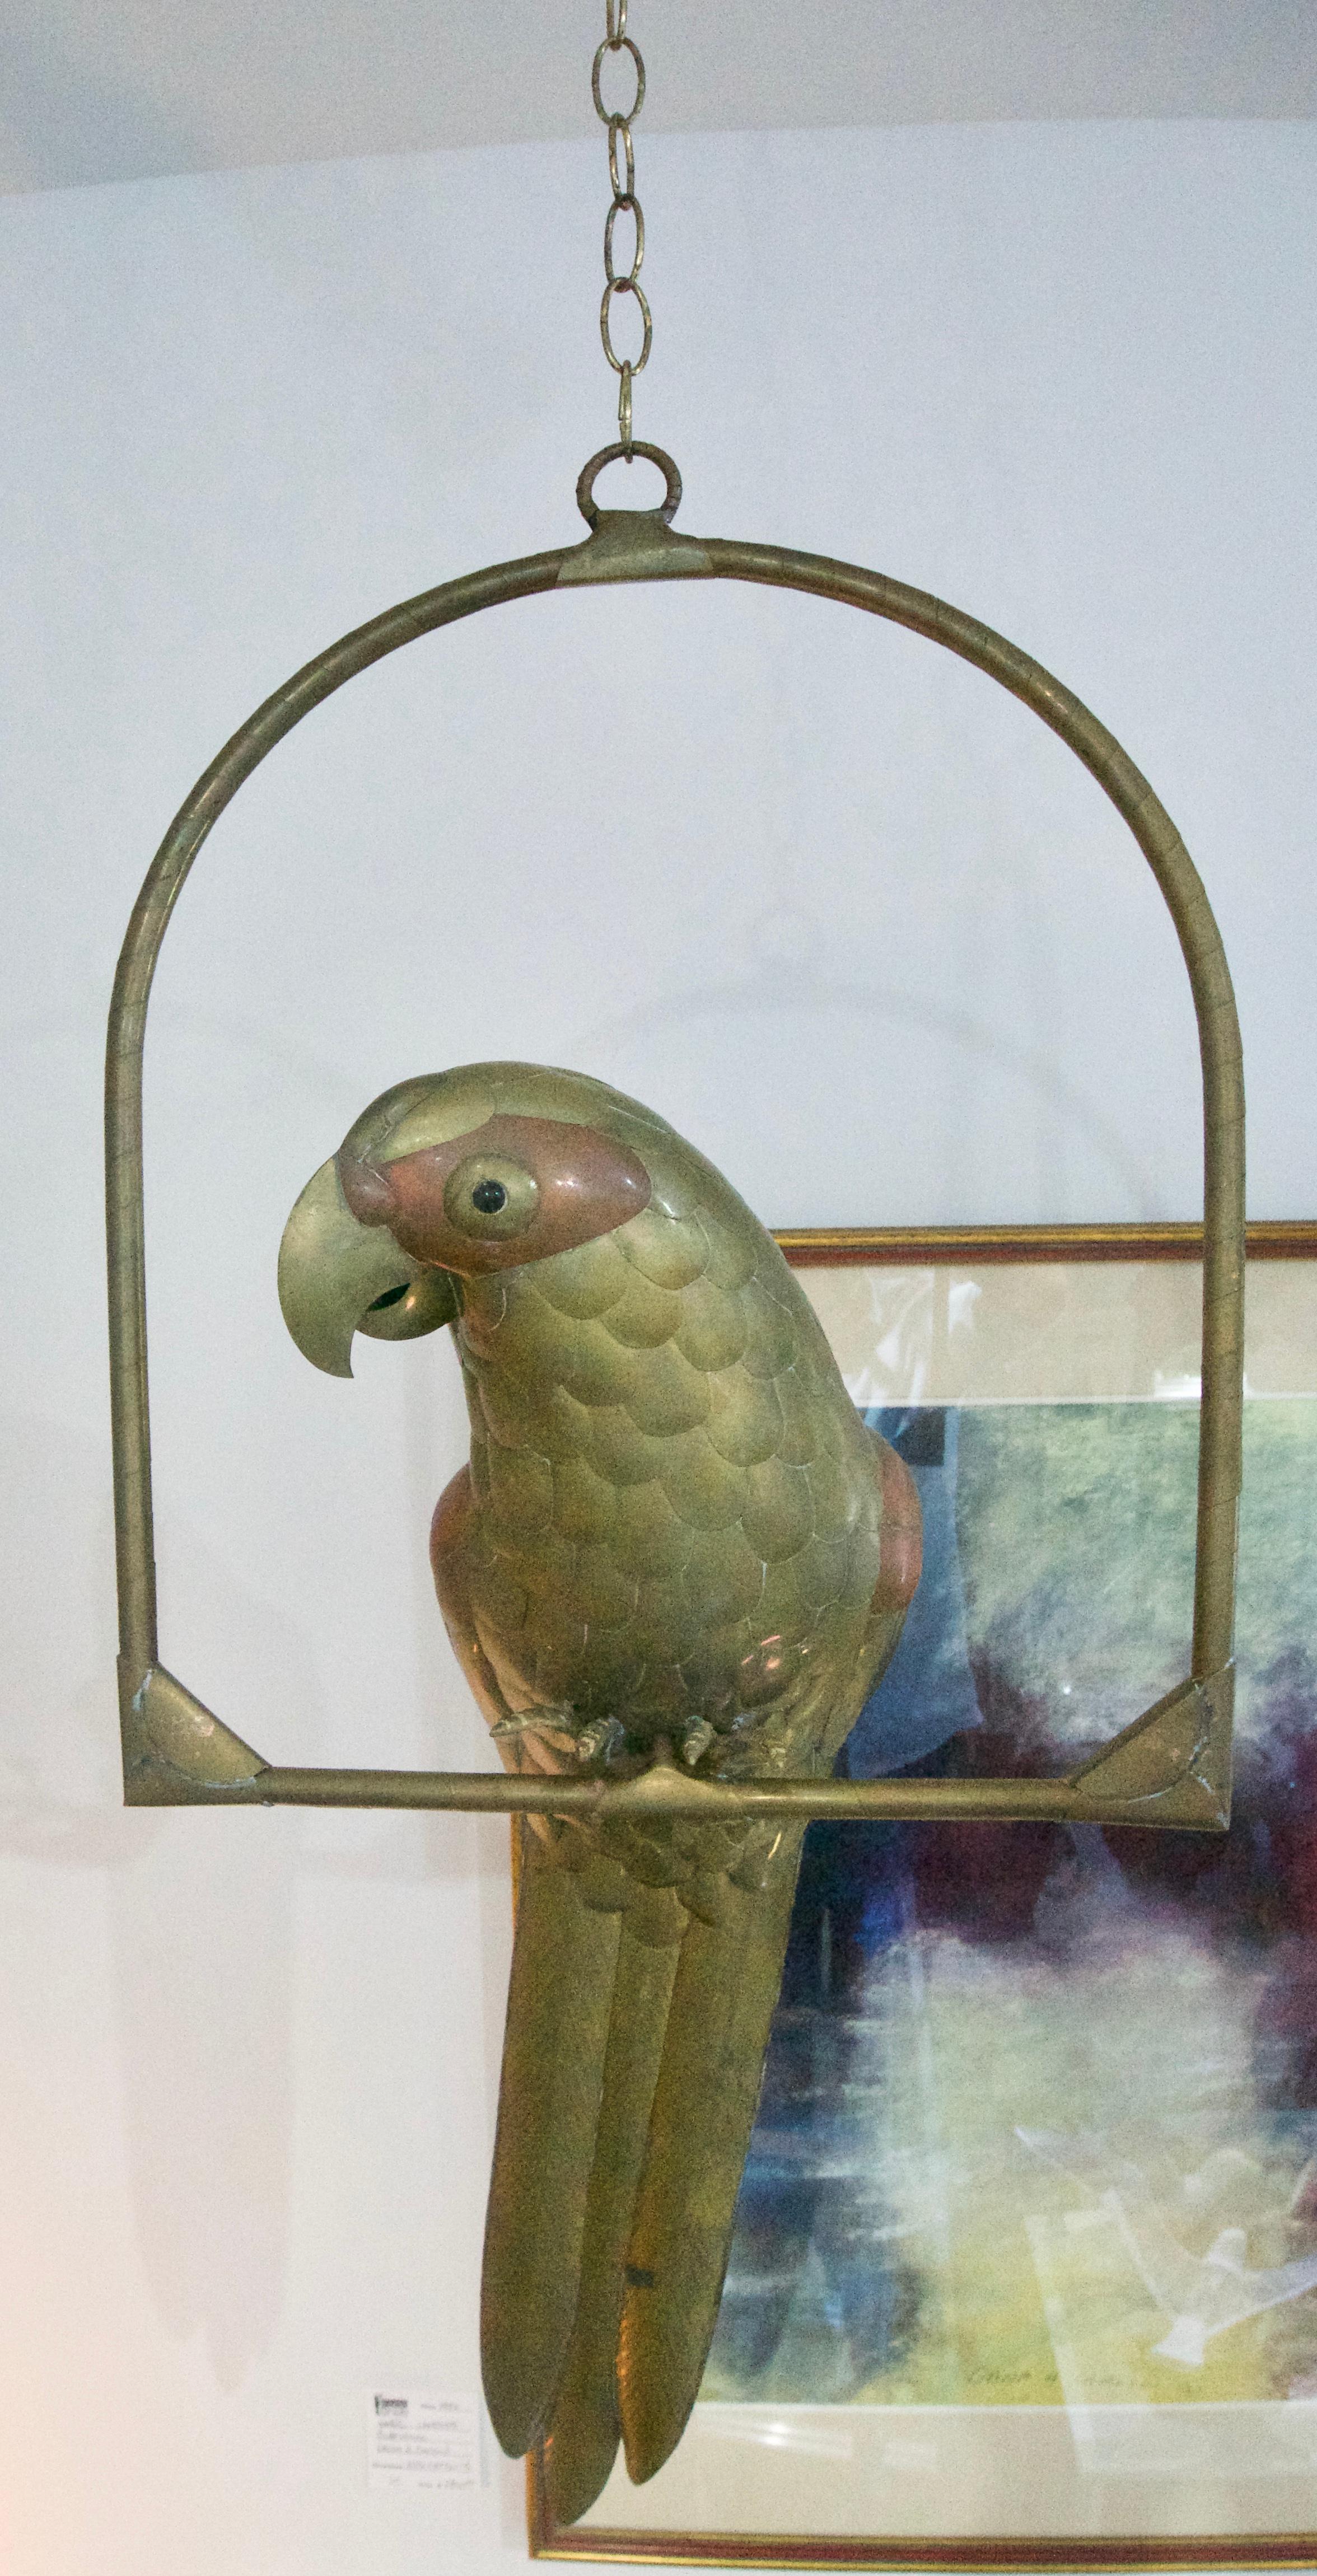 This charming life-size brass and copper Macaw parrot sculpture is by the renowned designer Sergio Bustamante and dates to the 1960s

Dimensions:  From bottom of parrots tail feathers to the top of the round ring is 33